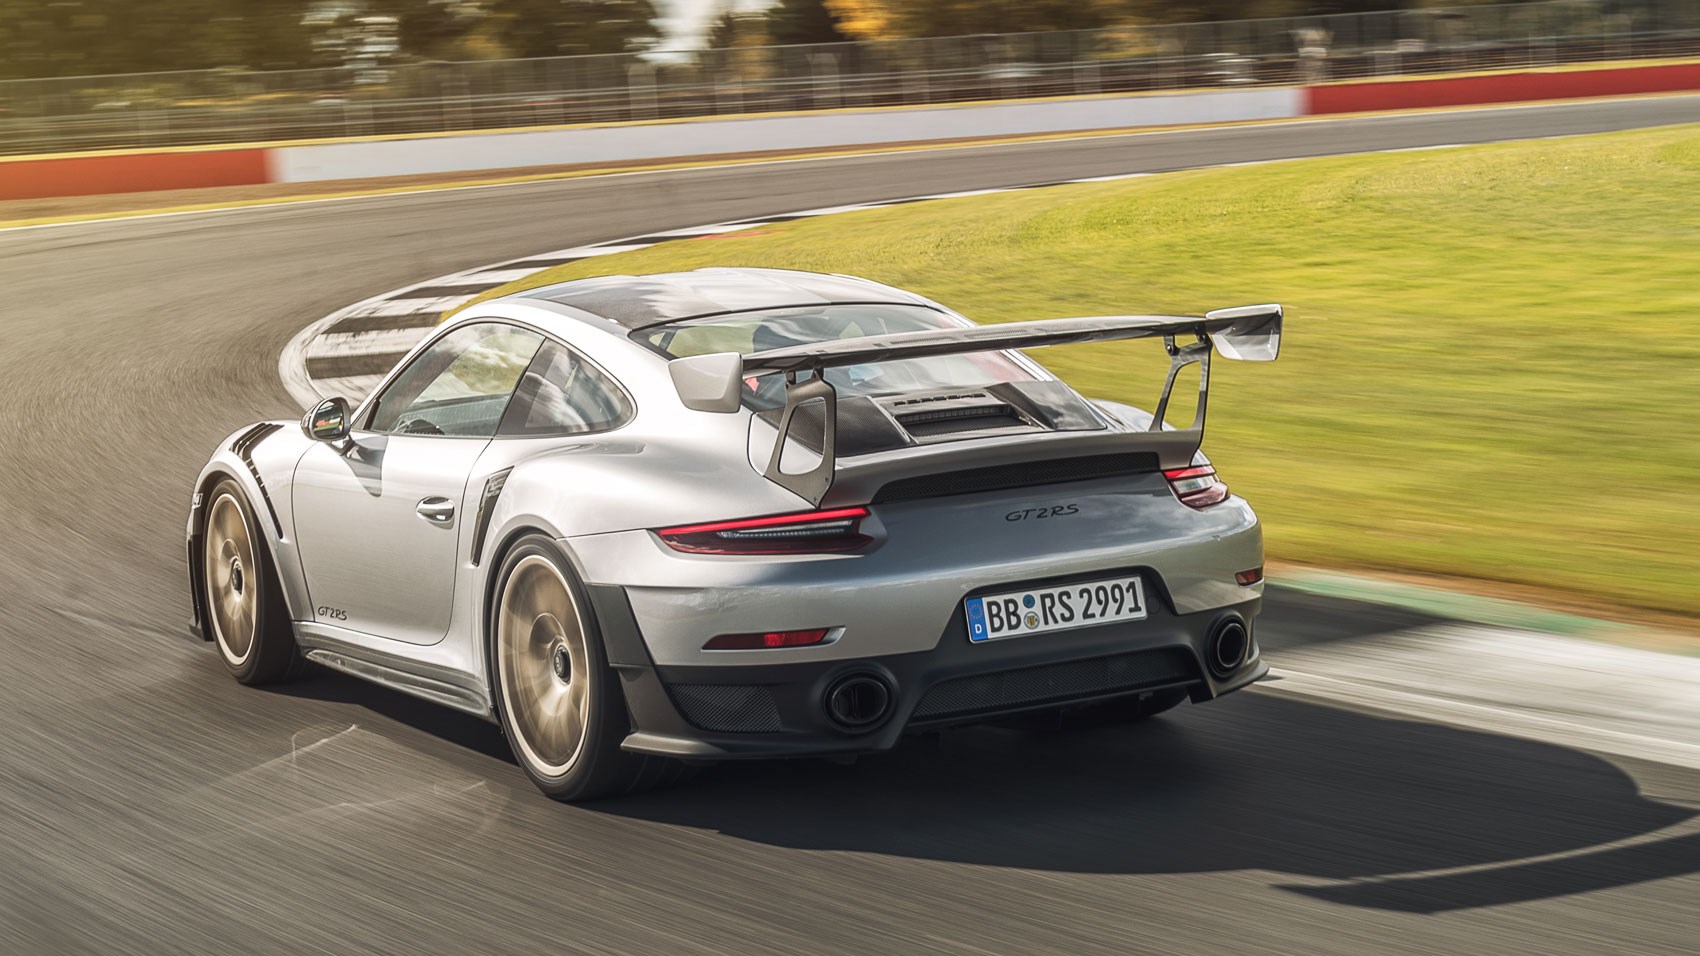 Porsche 911 GT2 RS (All Years) Wallpaper Collection.